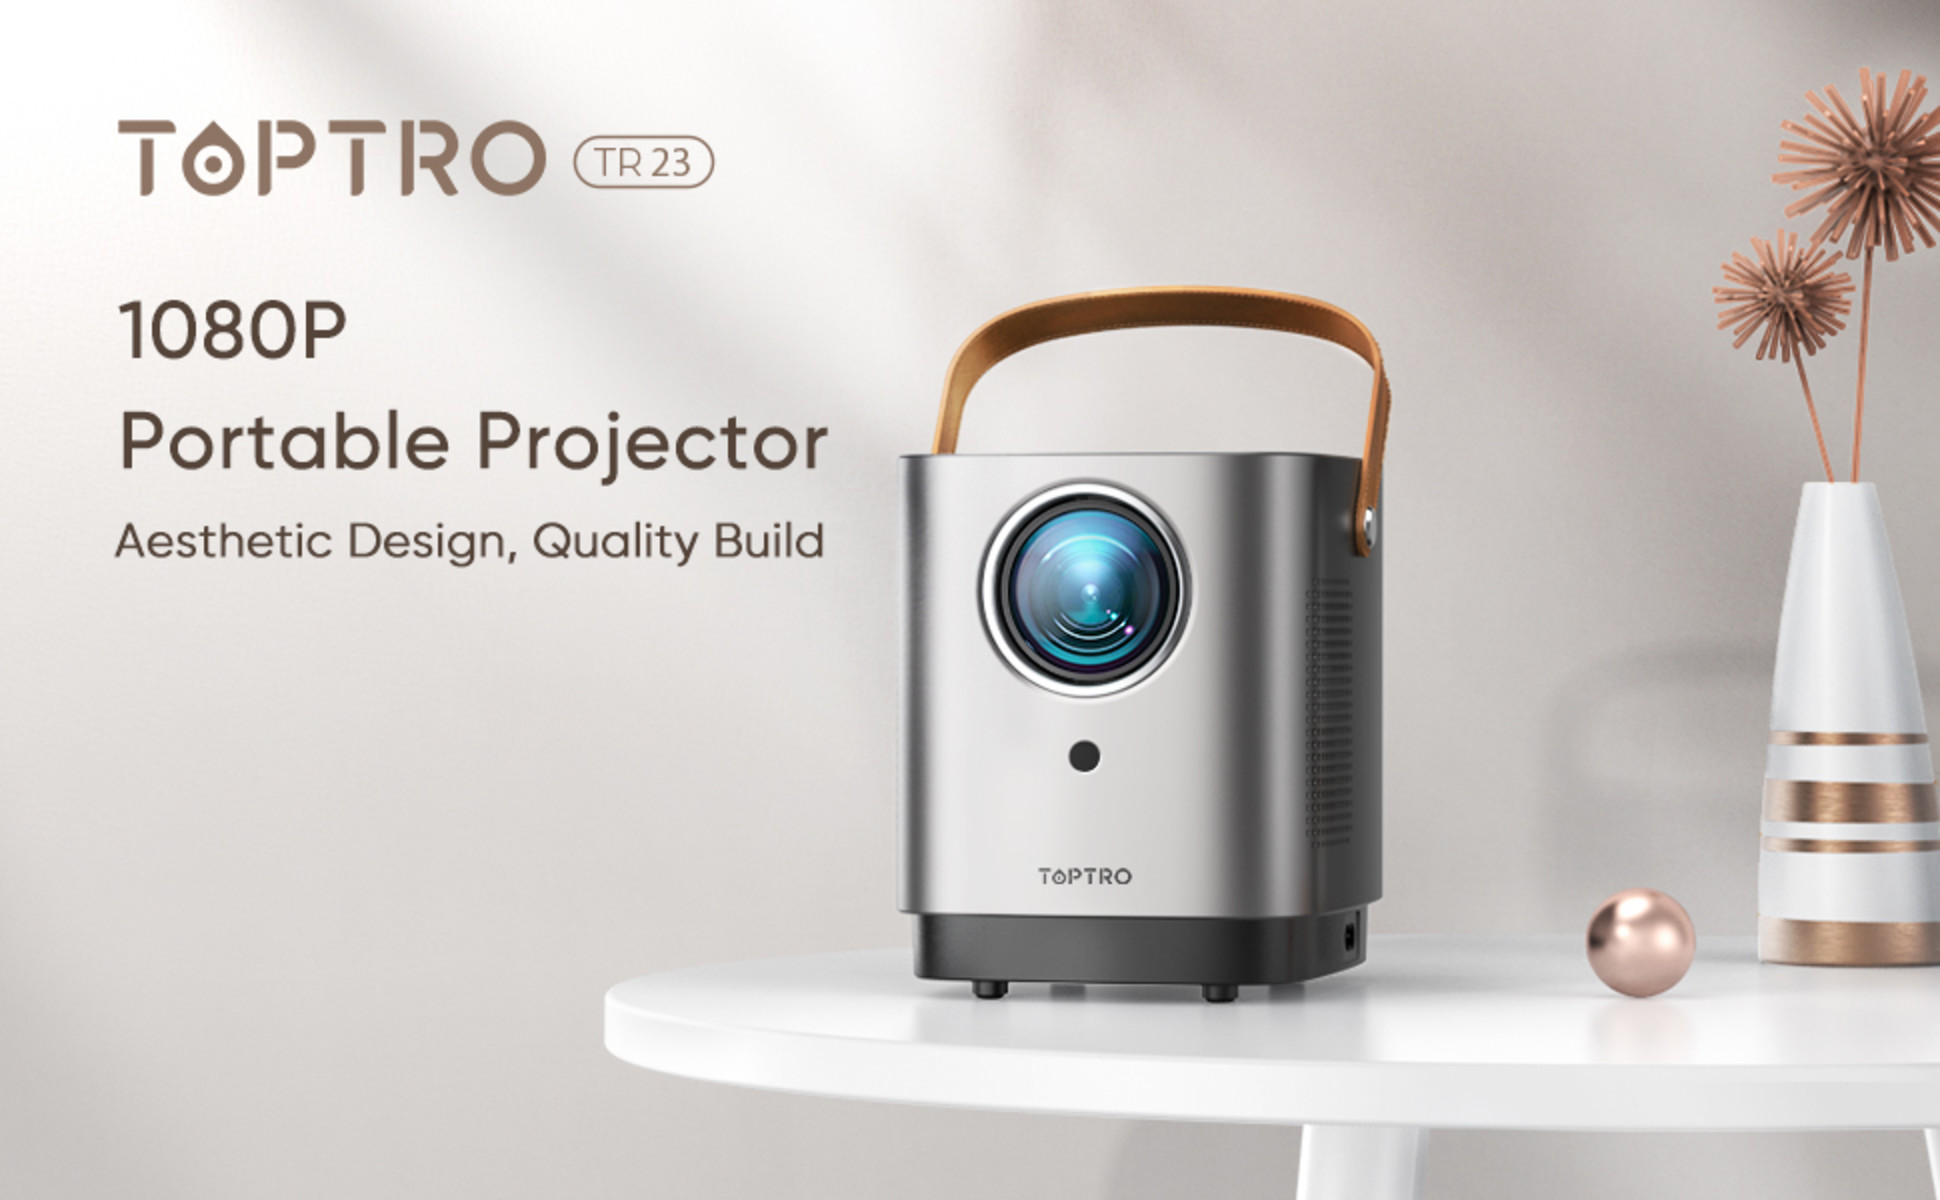 White Toptro X3 Projector Bundle! NEVER USED. Includes HDMI cable